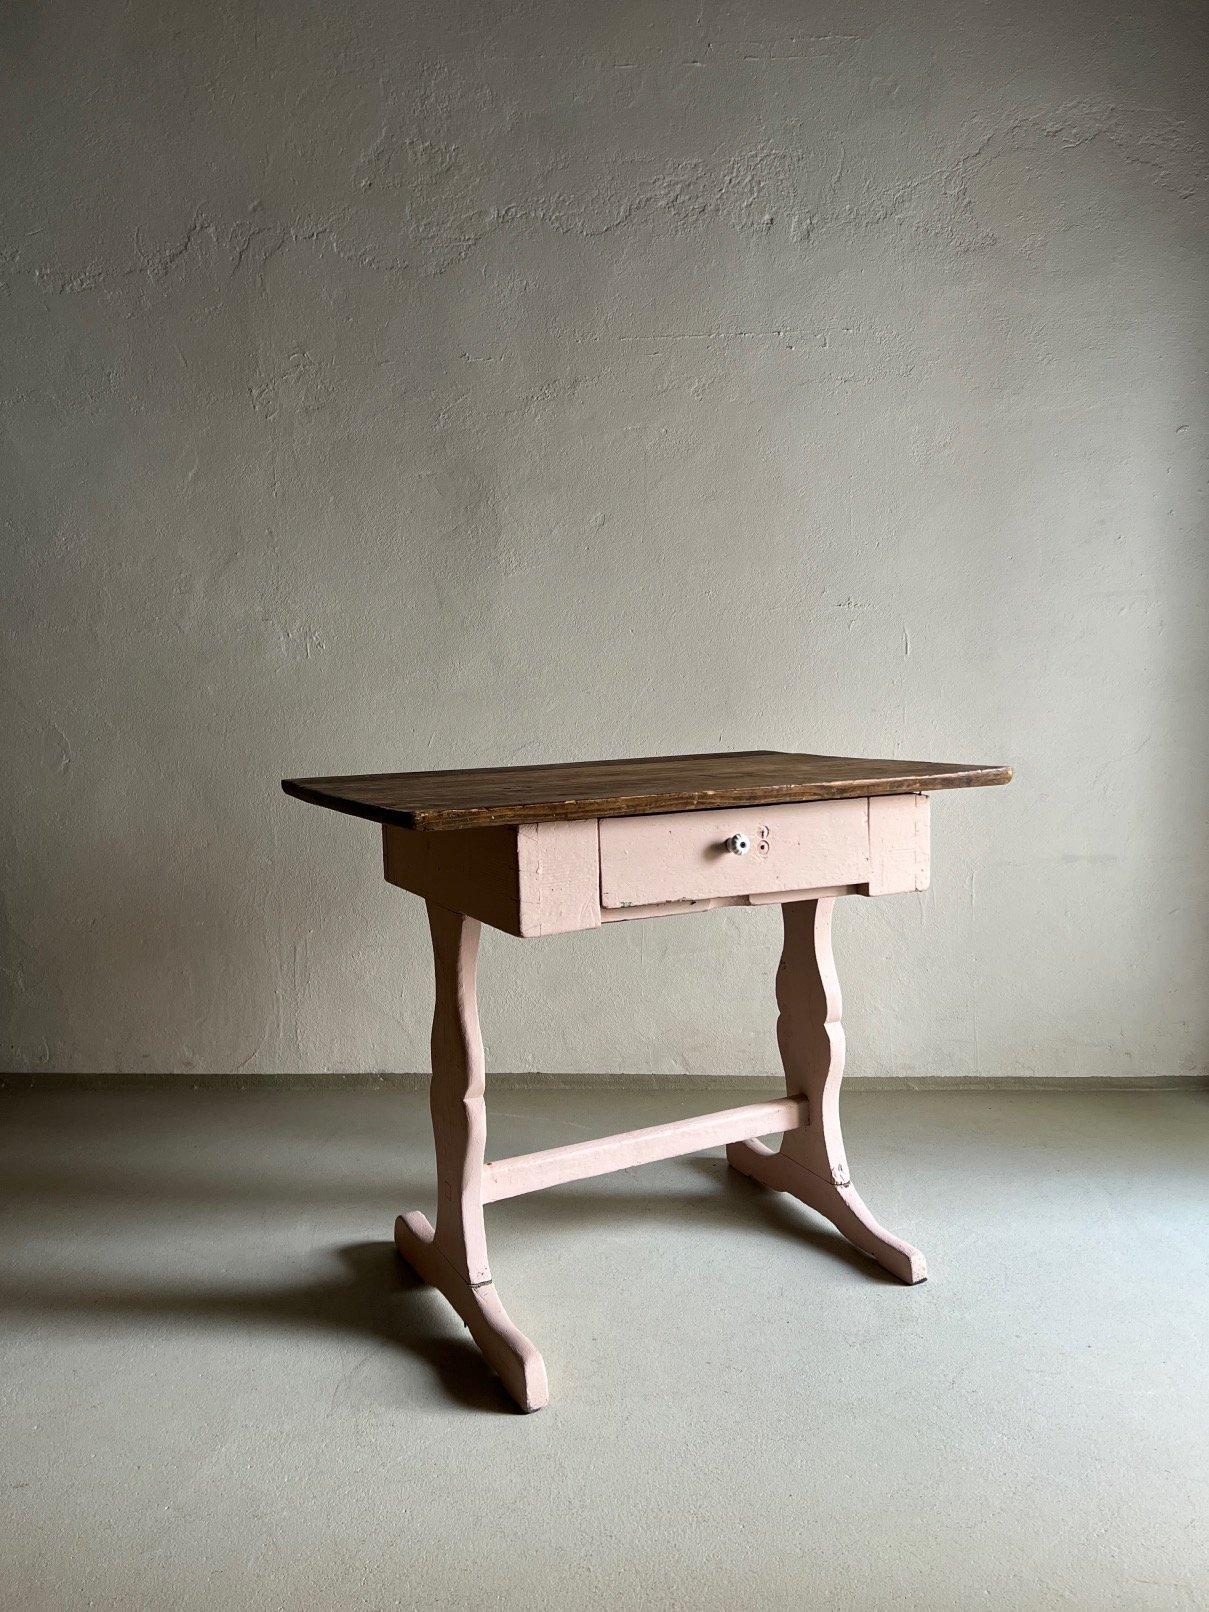 Antique rustic side table or desk with a drawer, may be used as a small kitchen table. Beautiful patina.

Additional information:
Place of origin - The Netherlands
Dimensions: 90 W x 63 D x 77 H cm